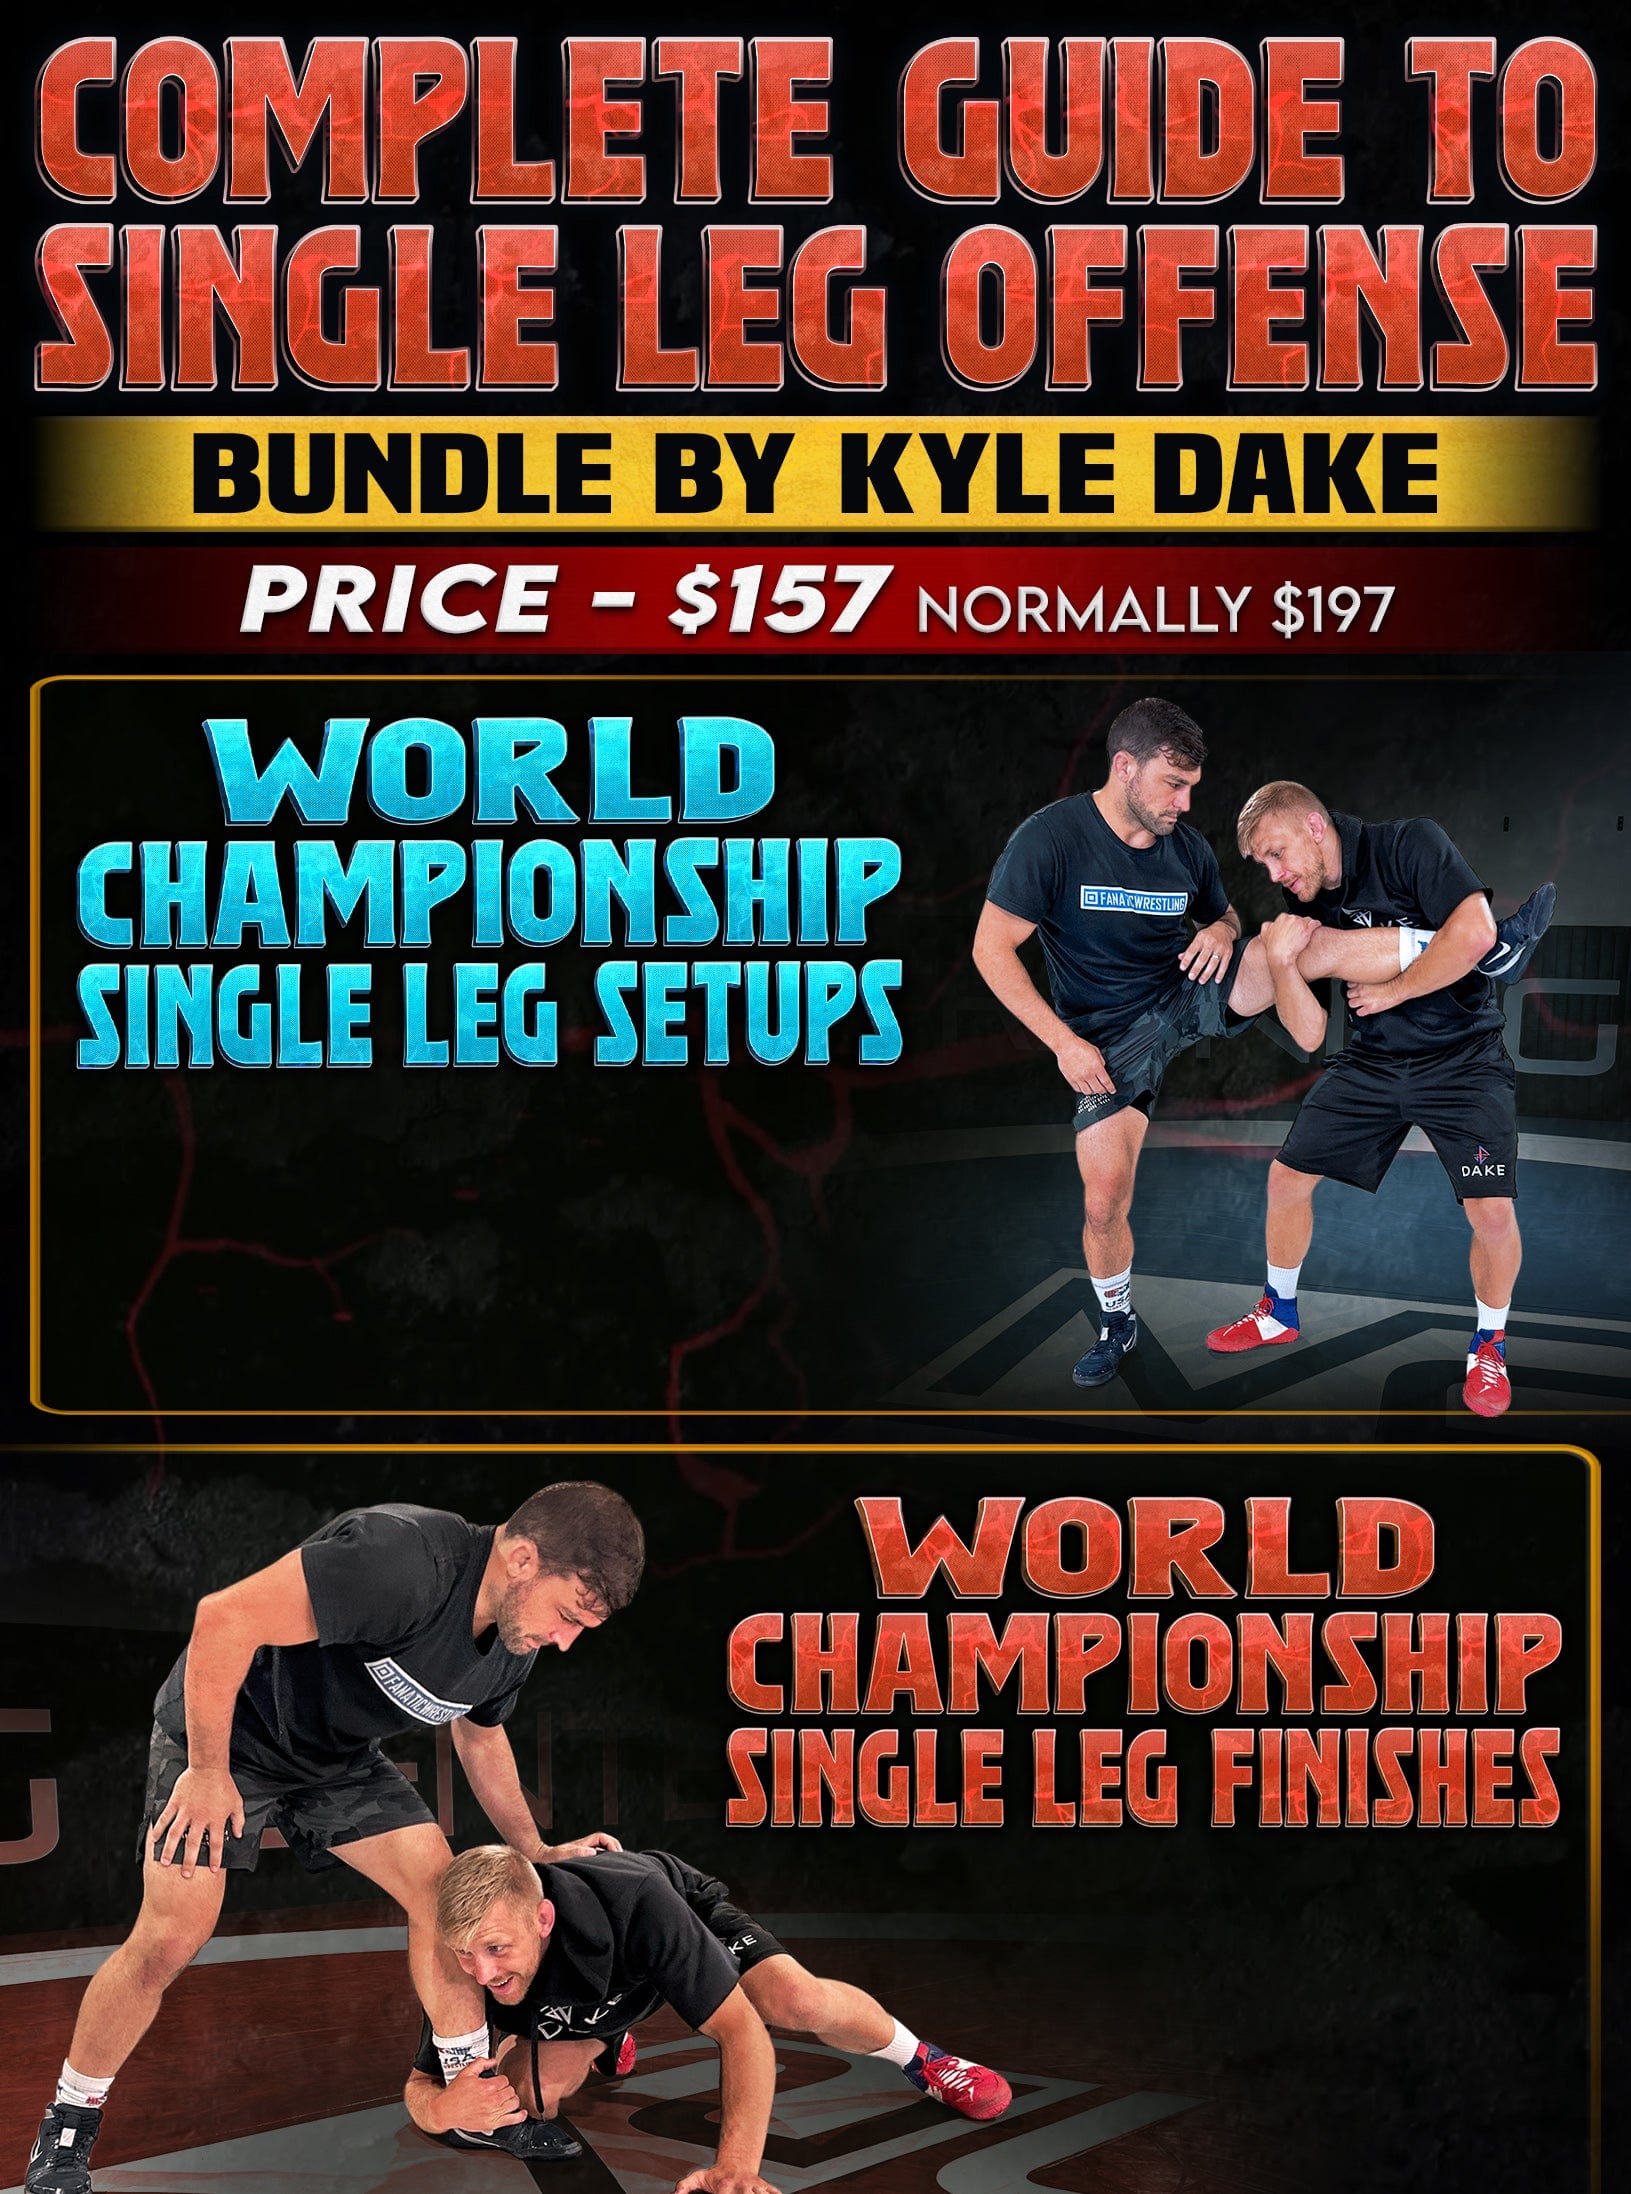 Complete Guide To Single Leg Offense Bundle by Kyle Dake - Fanatic Wrestling